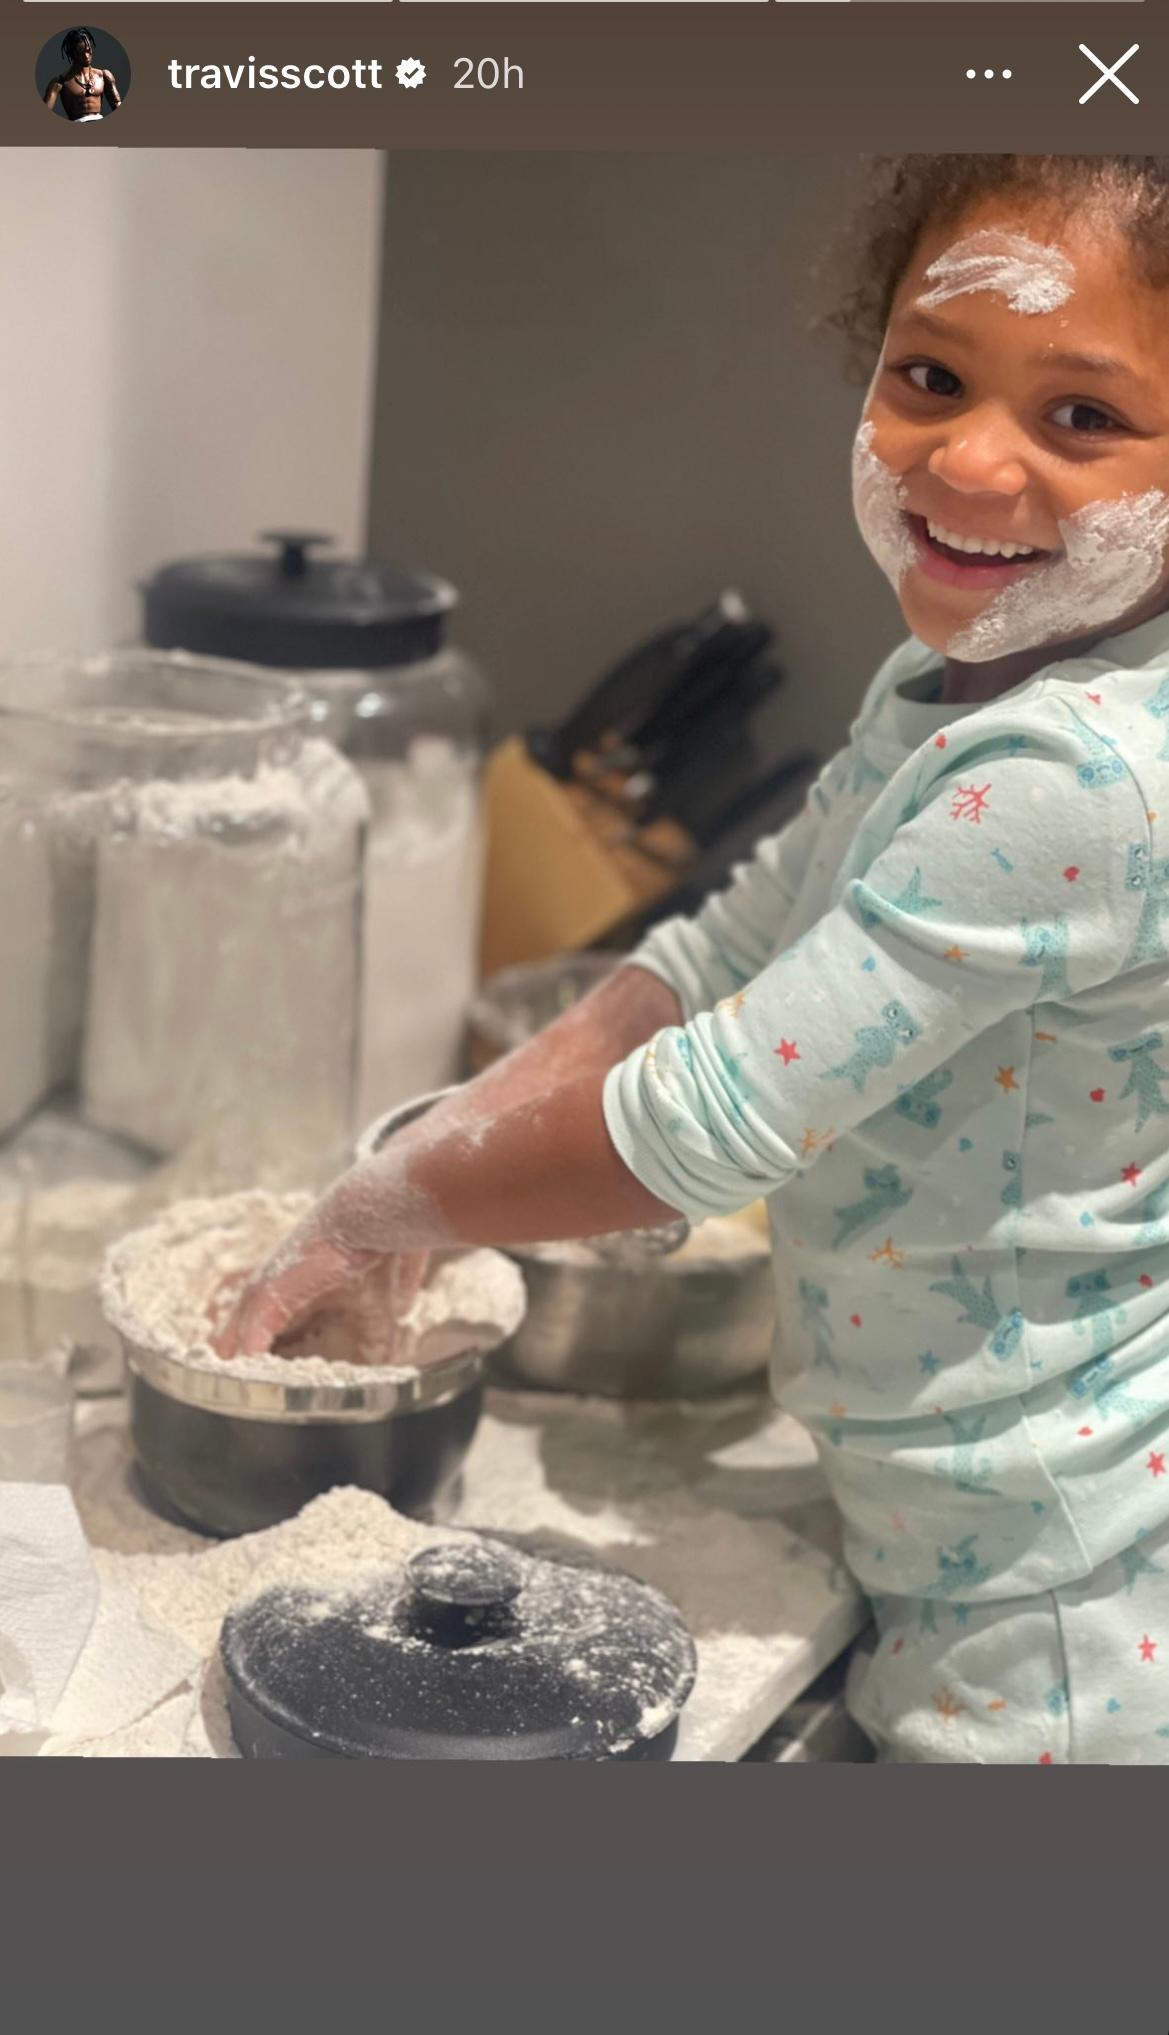 Travis Scott bonds with daughter Stormi over baking session